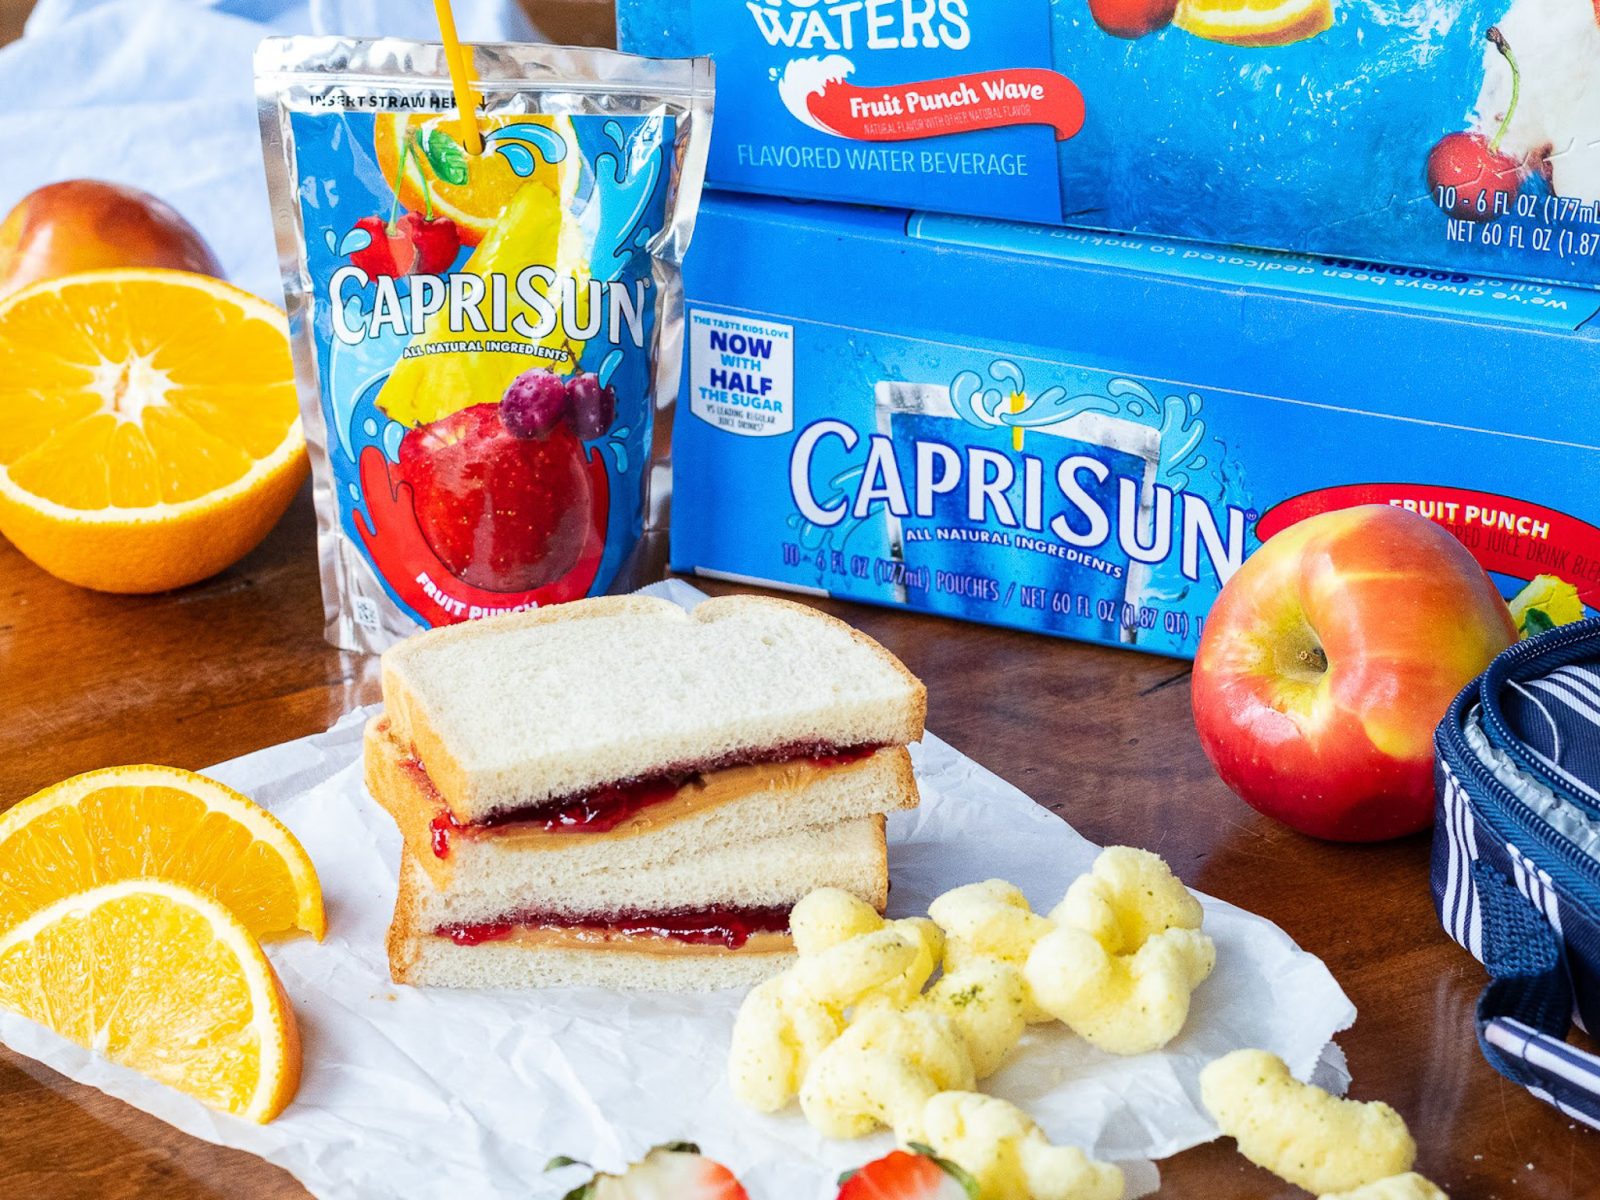 Get The Boxes Of Capri Sun Drinks For As Low As $1.88 Per Box At Kroger